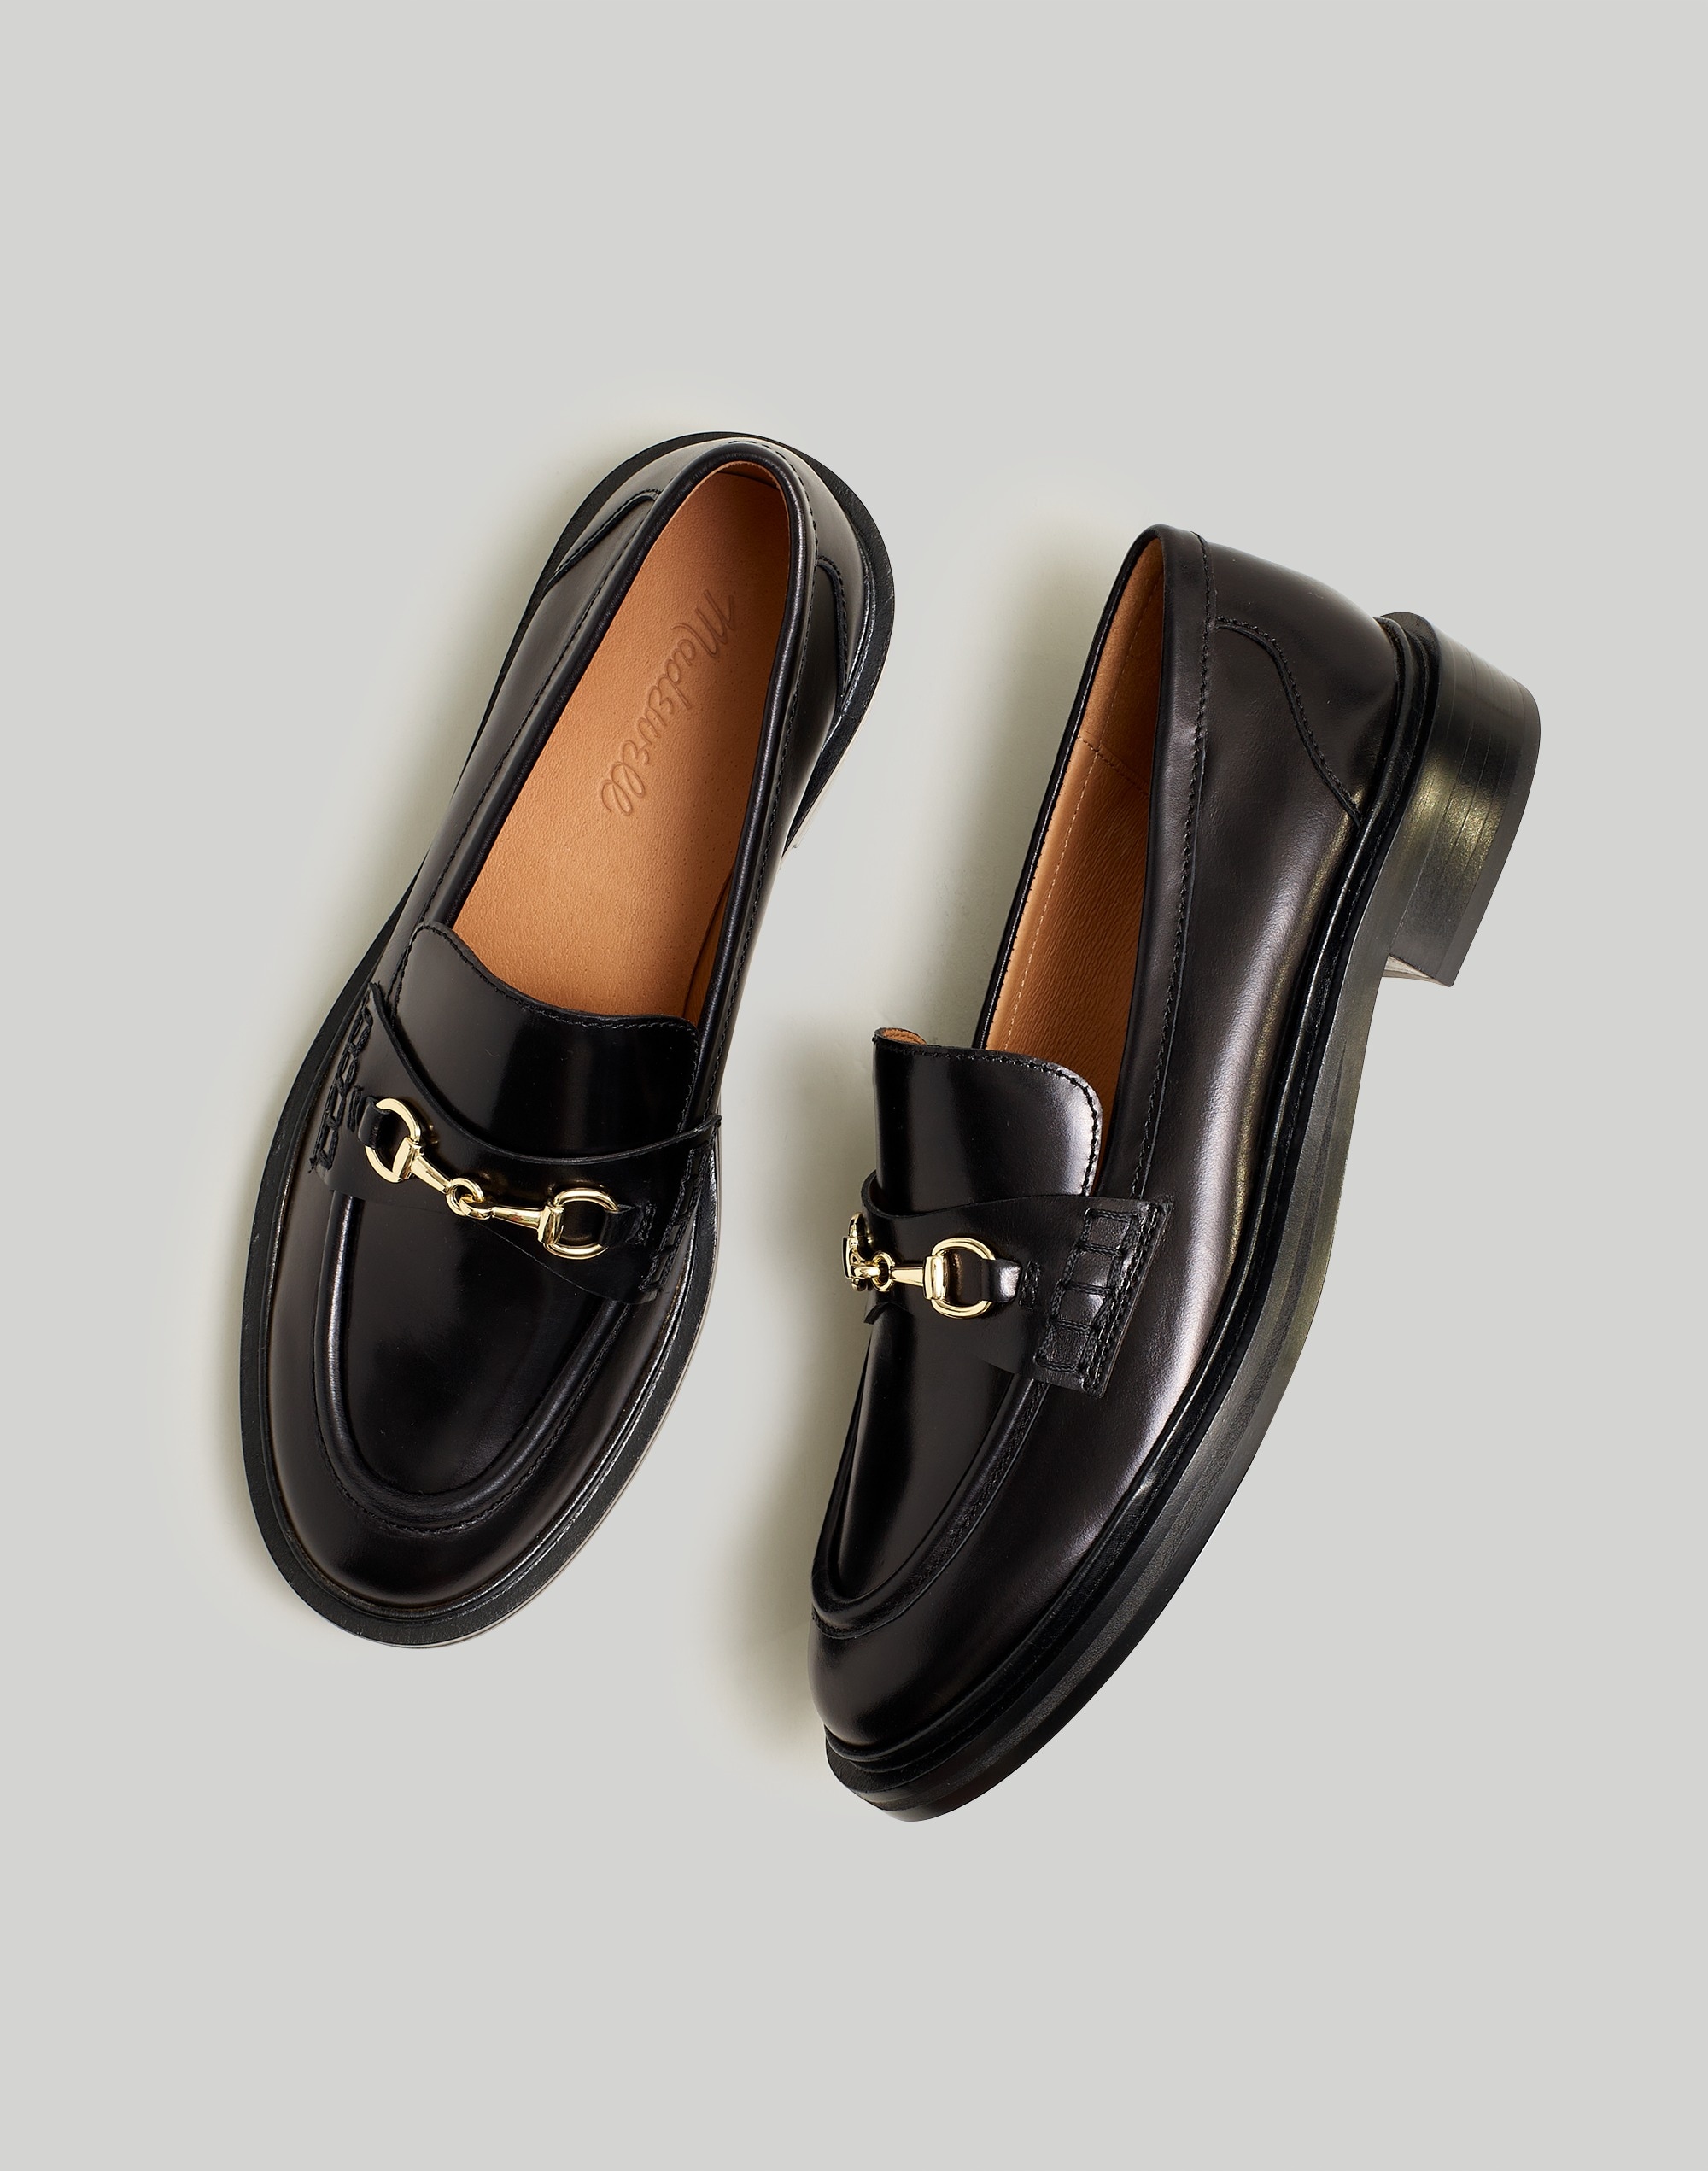 The Vernon Bit Hardware Loafer Leather